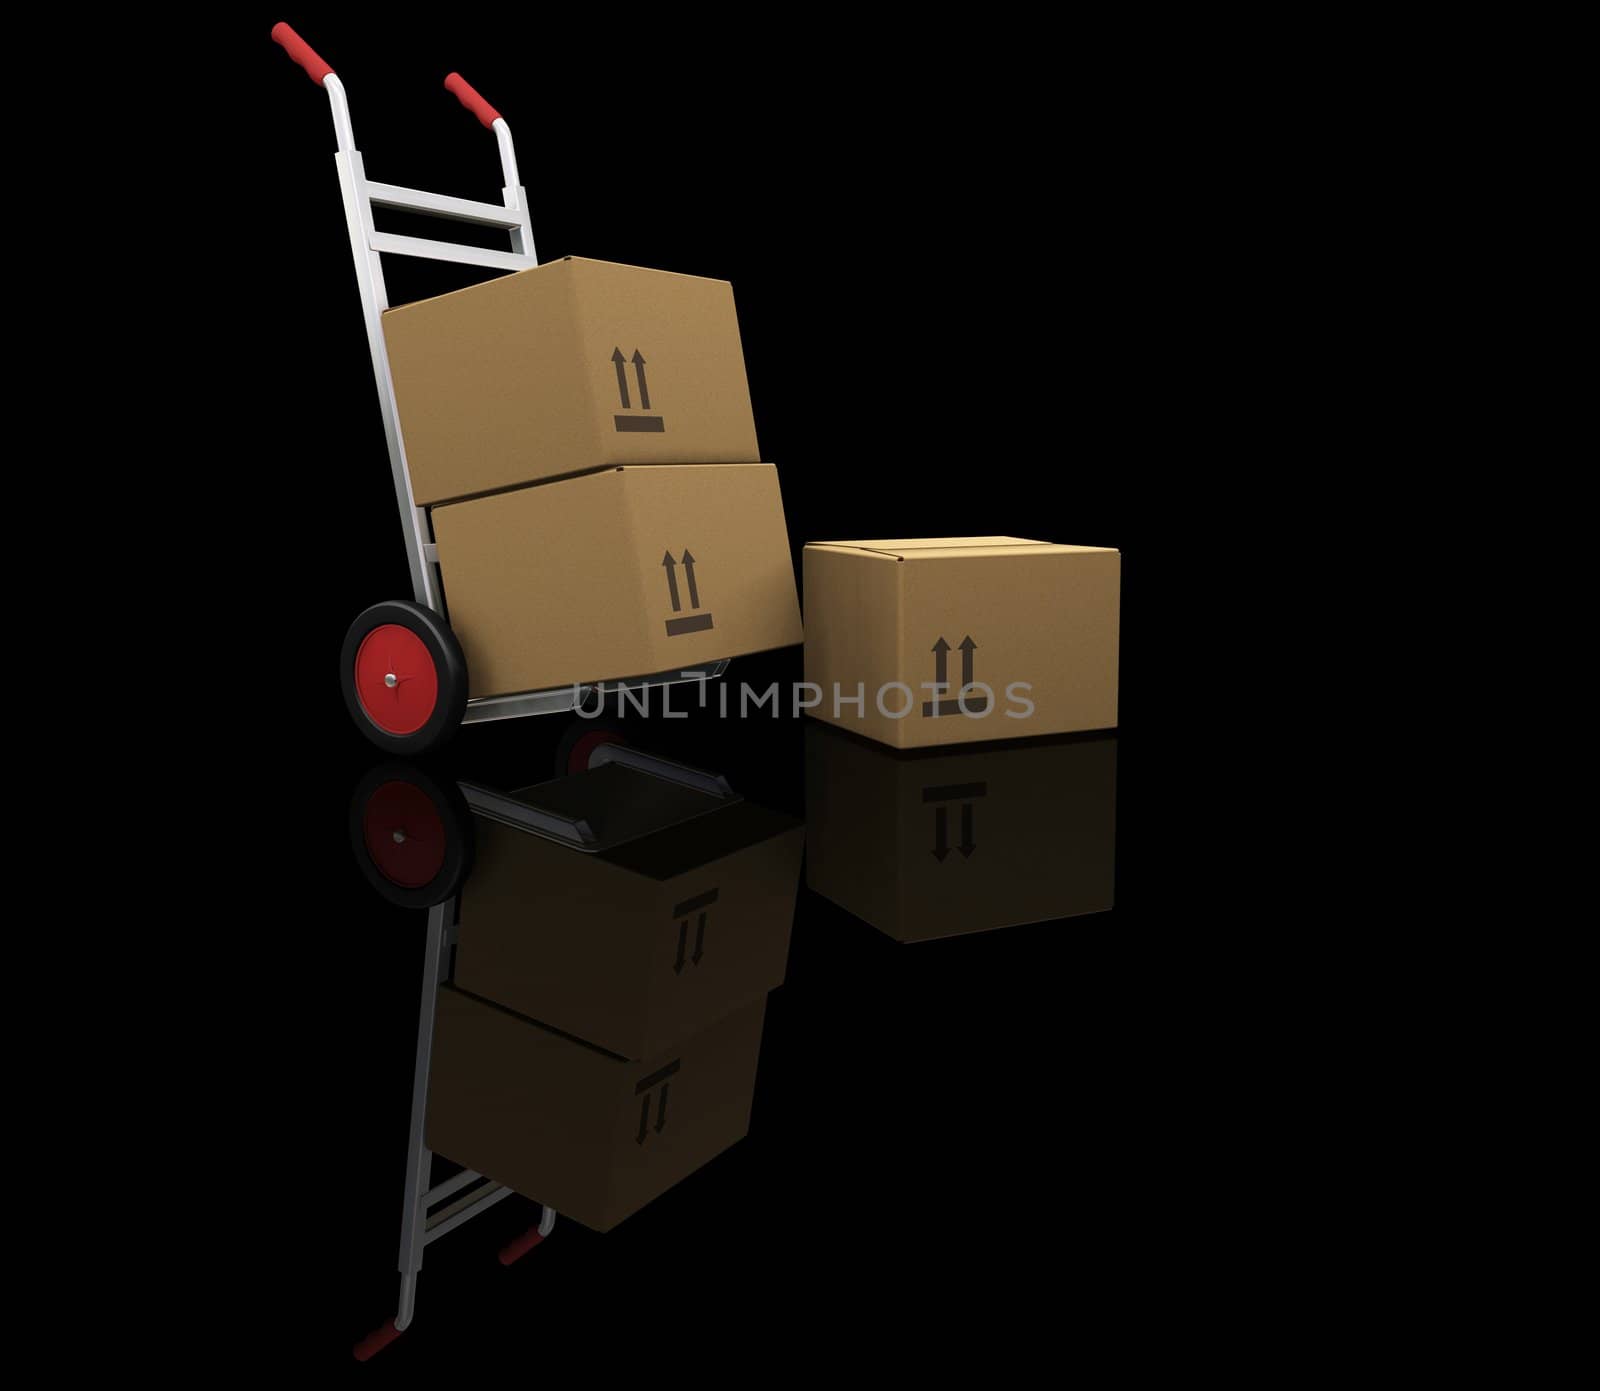 3D render of a handtruck with boxes